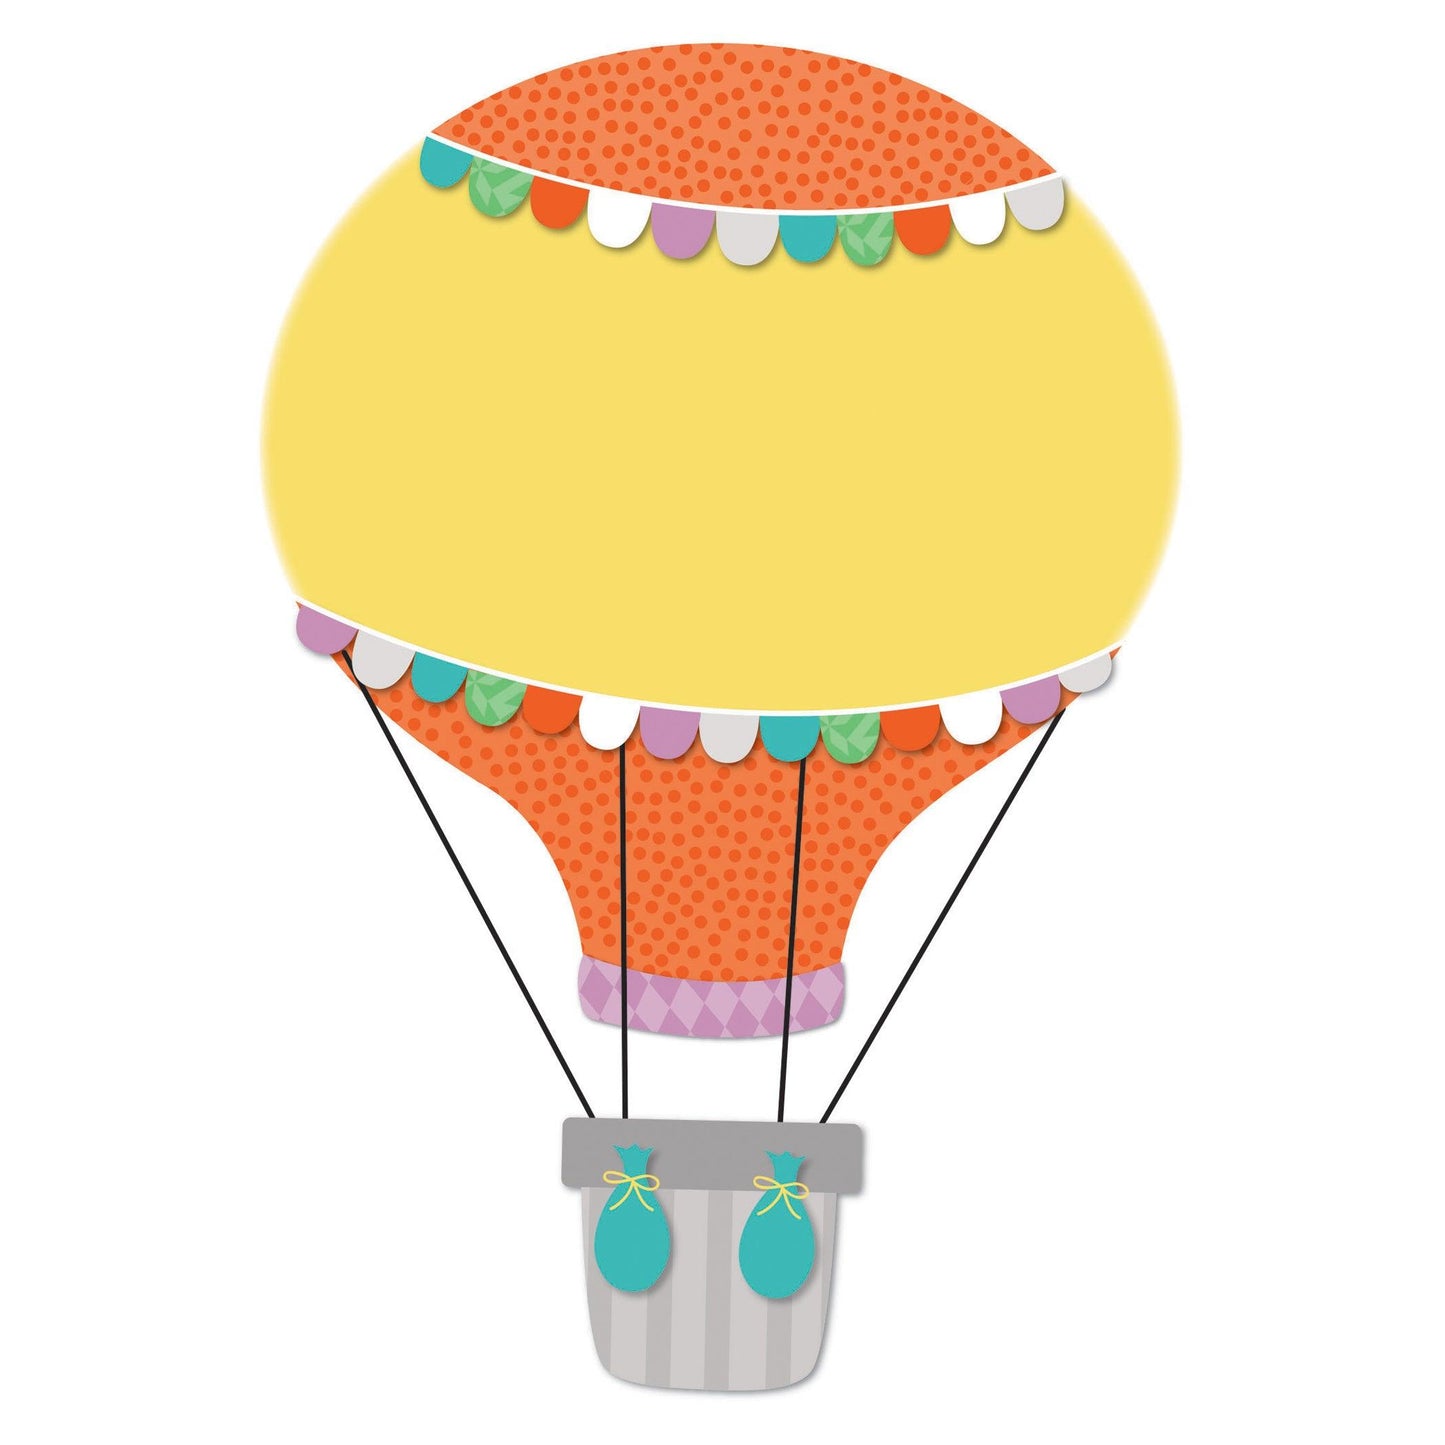 Up and Away Hot Air Balloons Cut-Outs, 36 Per Pack, 3 Packs - Loomini